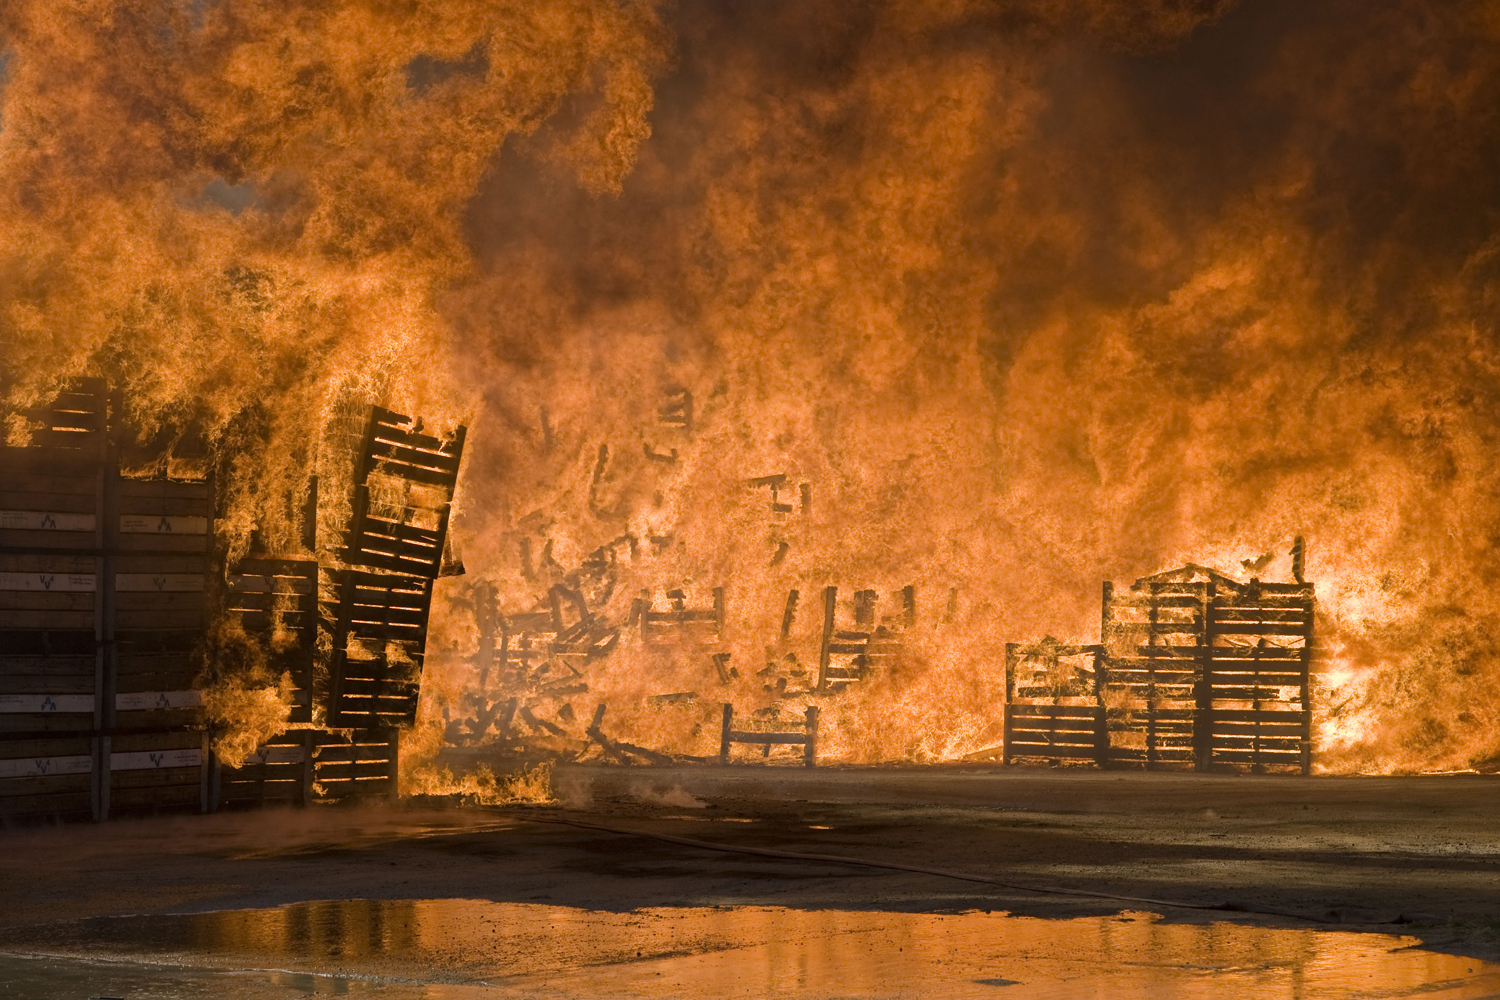 Image: Nov. 14, 2012. Fruit bins burn at a packing store in Wolesley, about 120km north of Cape Town.